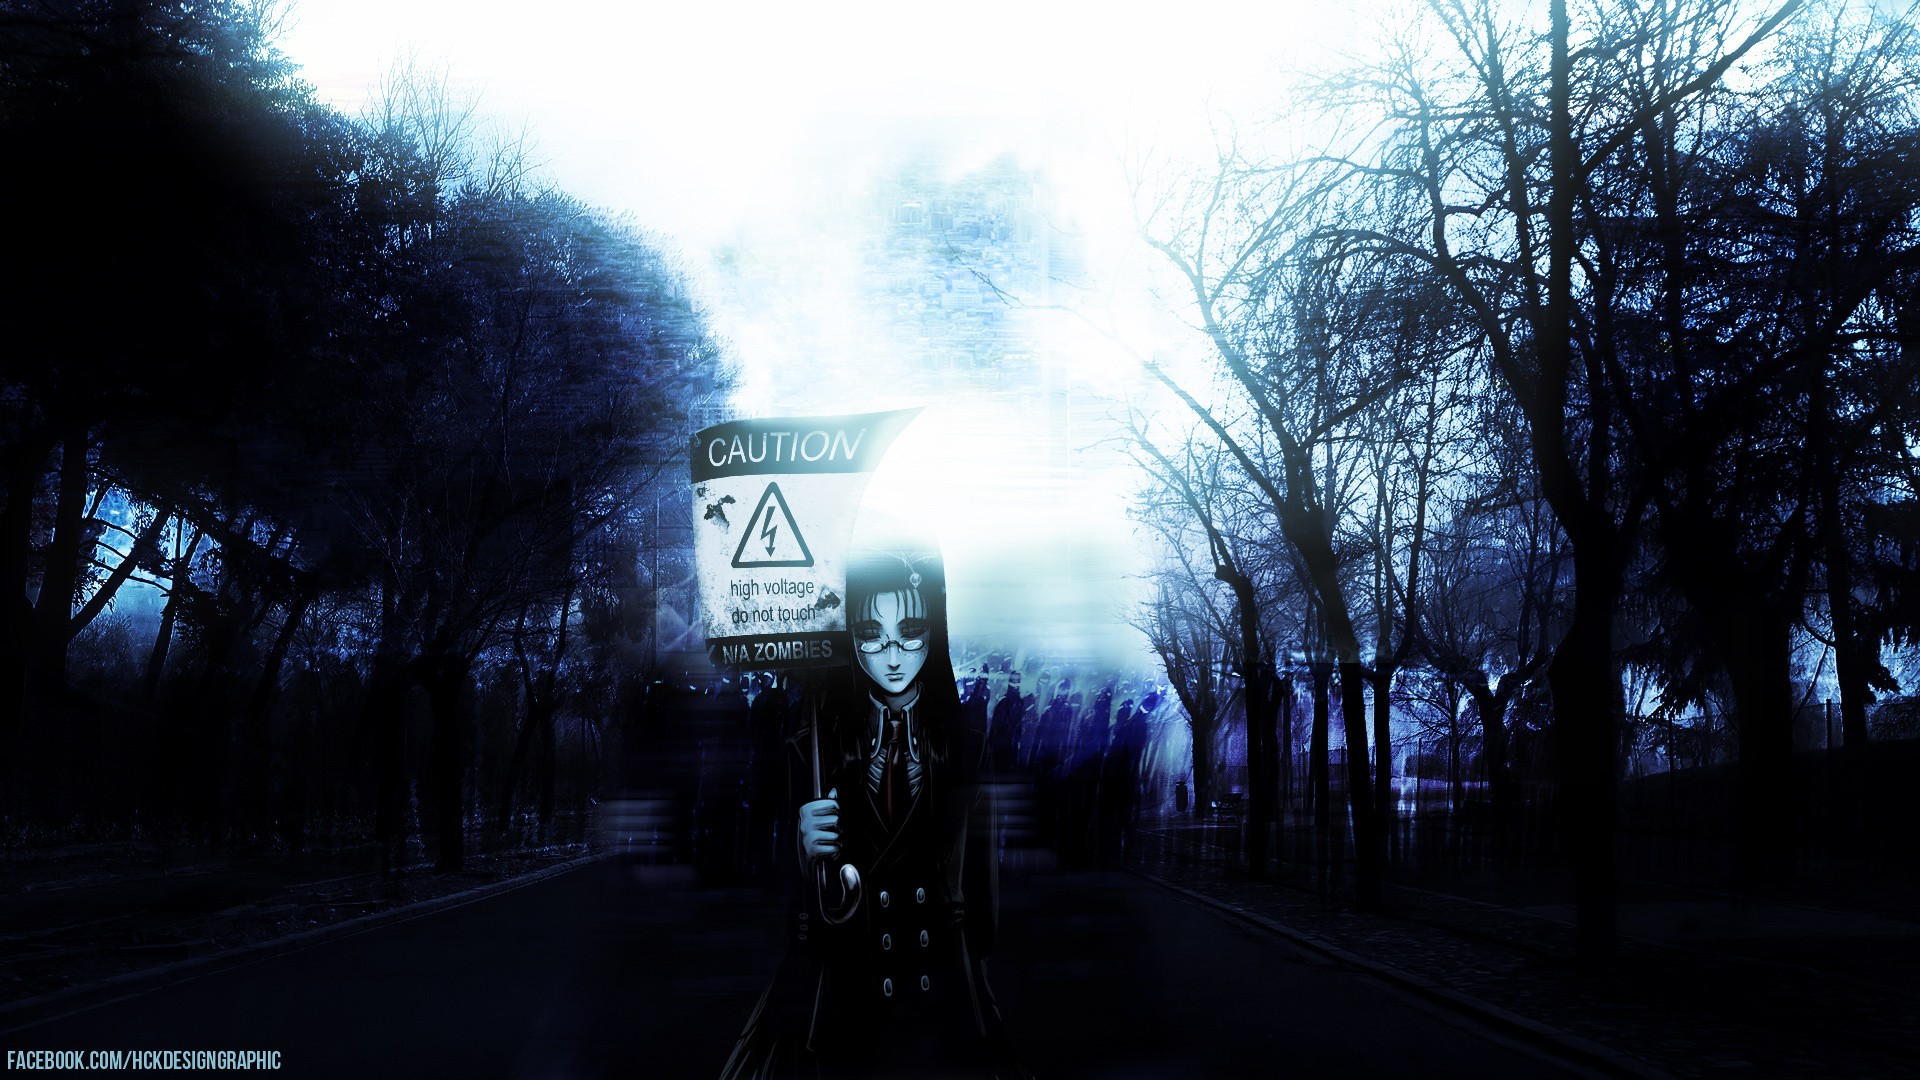 General 1920x1080 zombies high voltage caution undead horror artwork sign women with glasses road trees